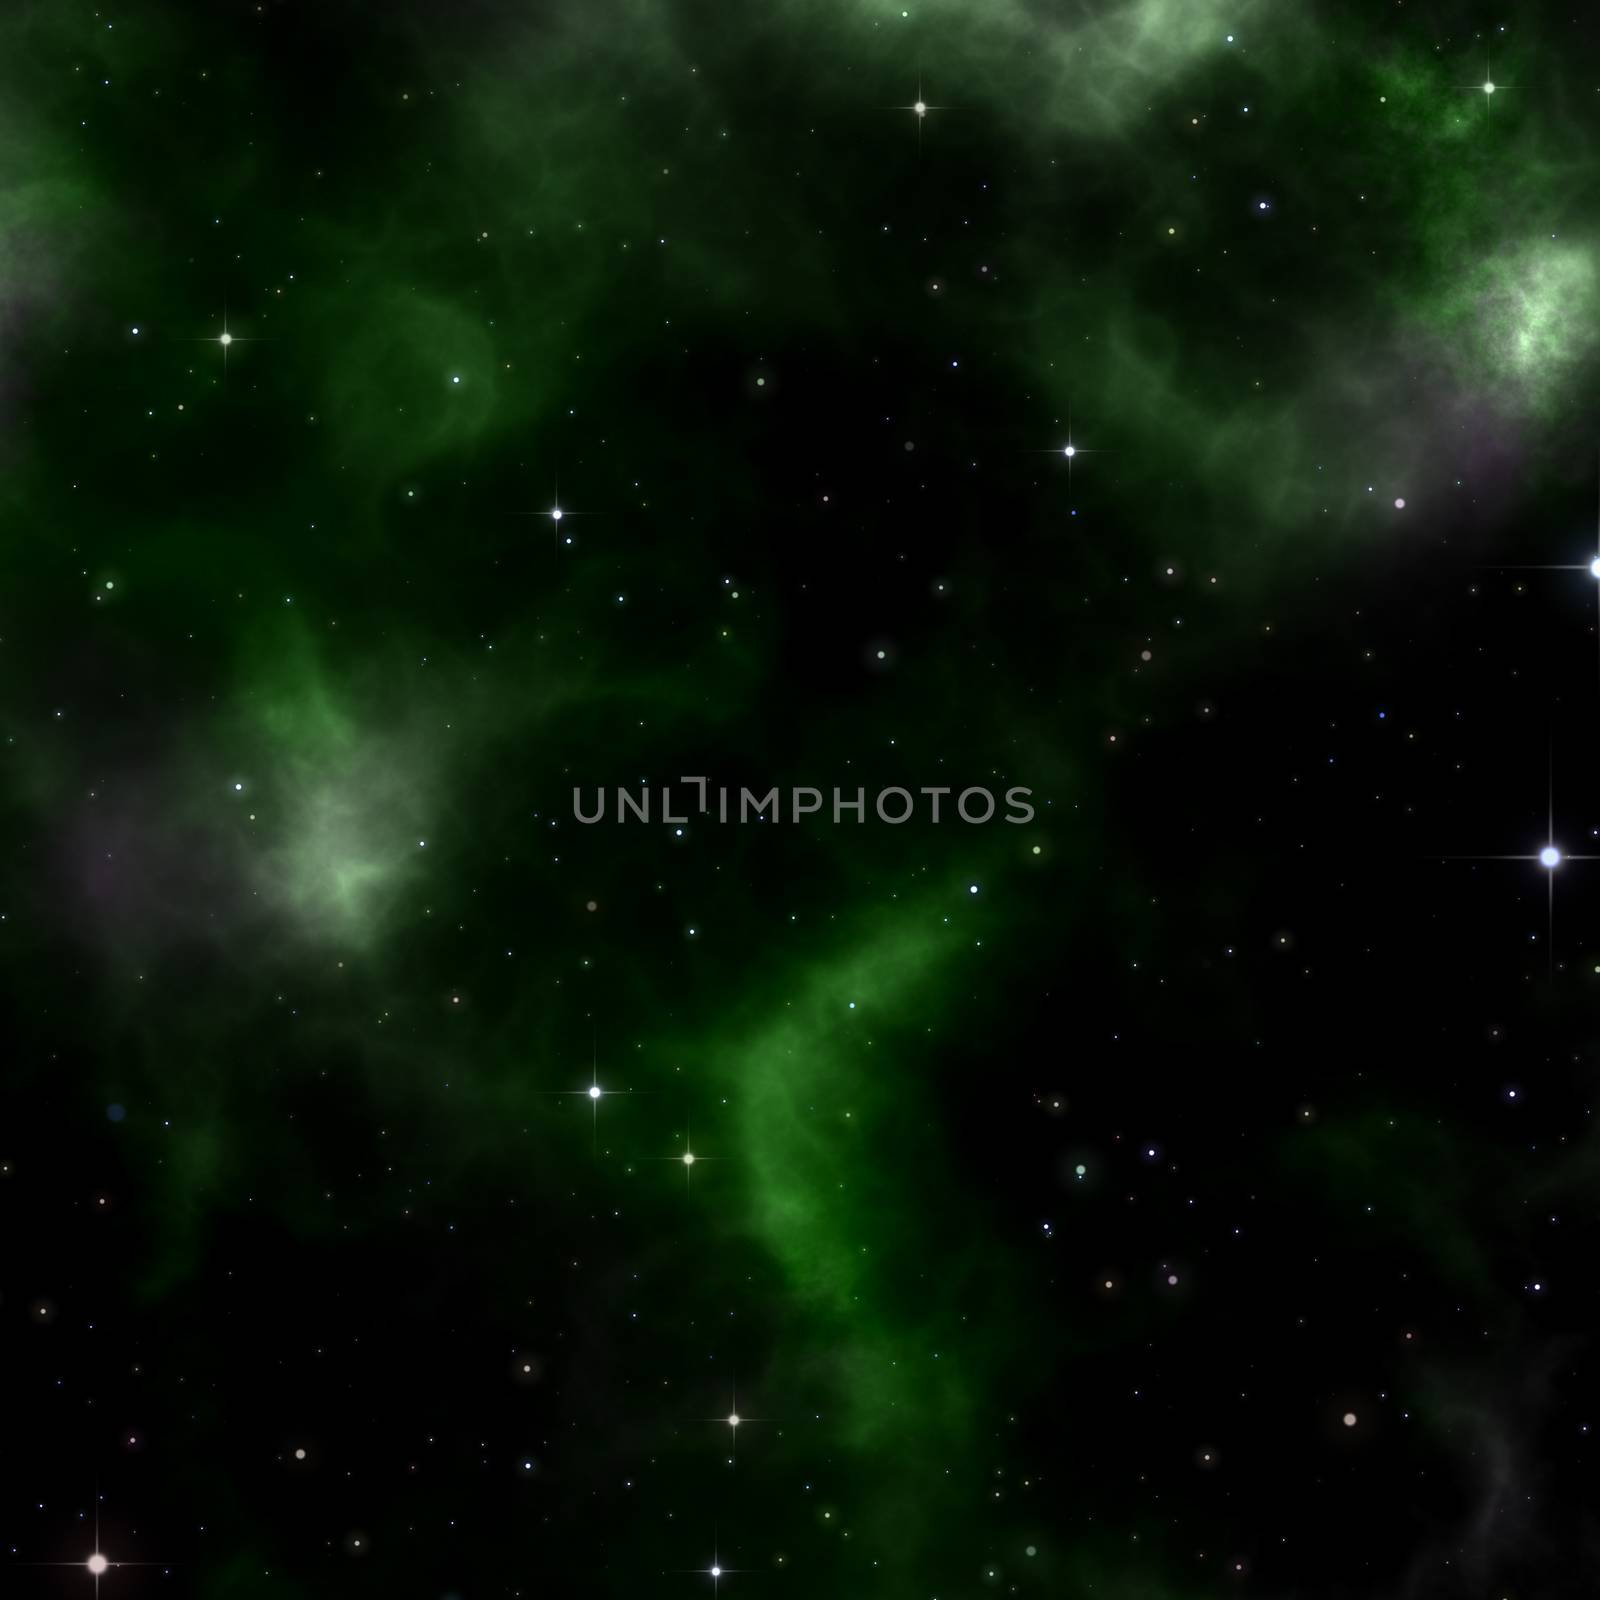 2d illustration of a stars background with green nebula